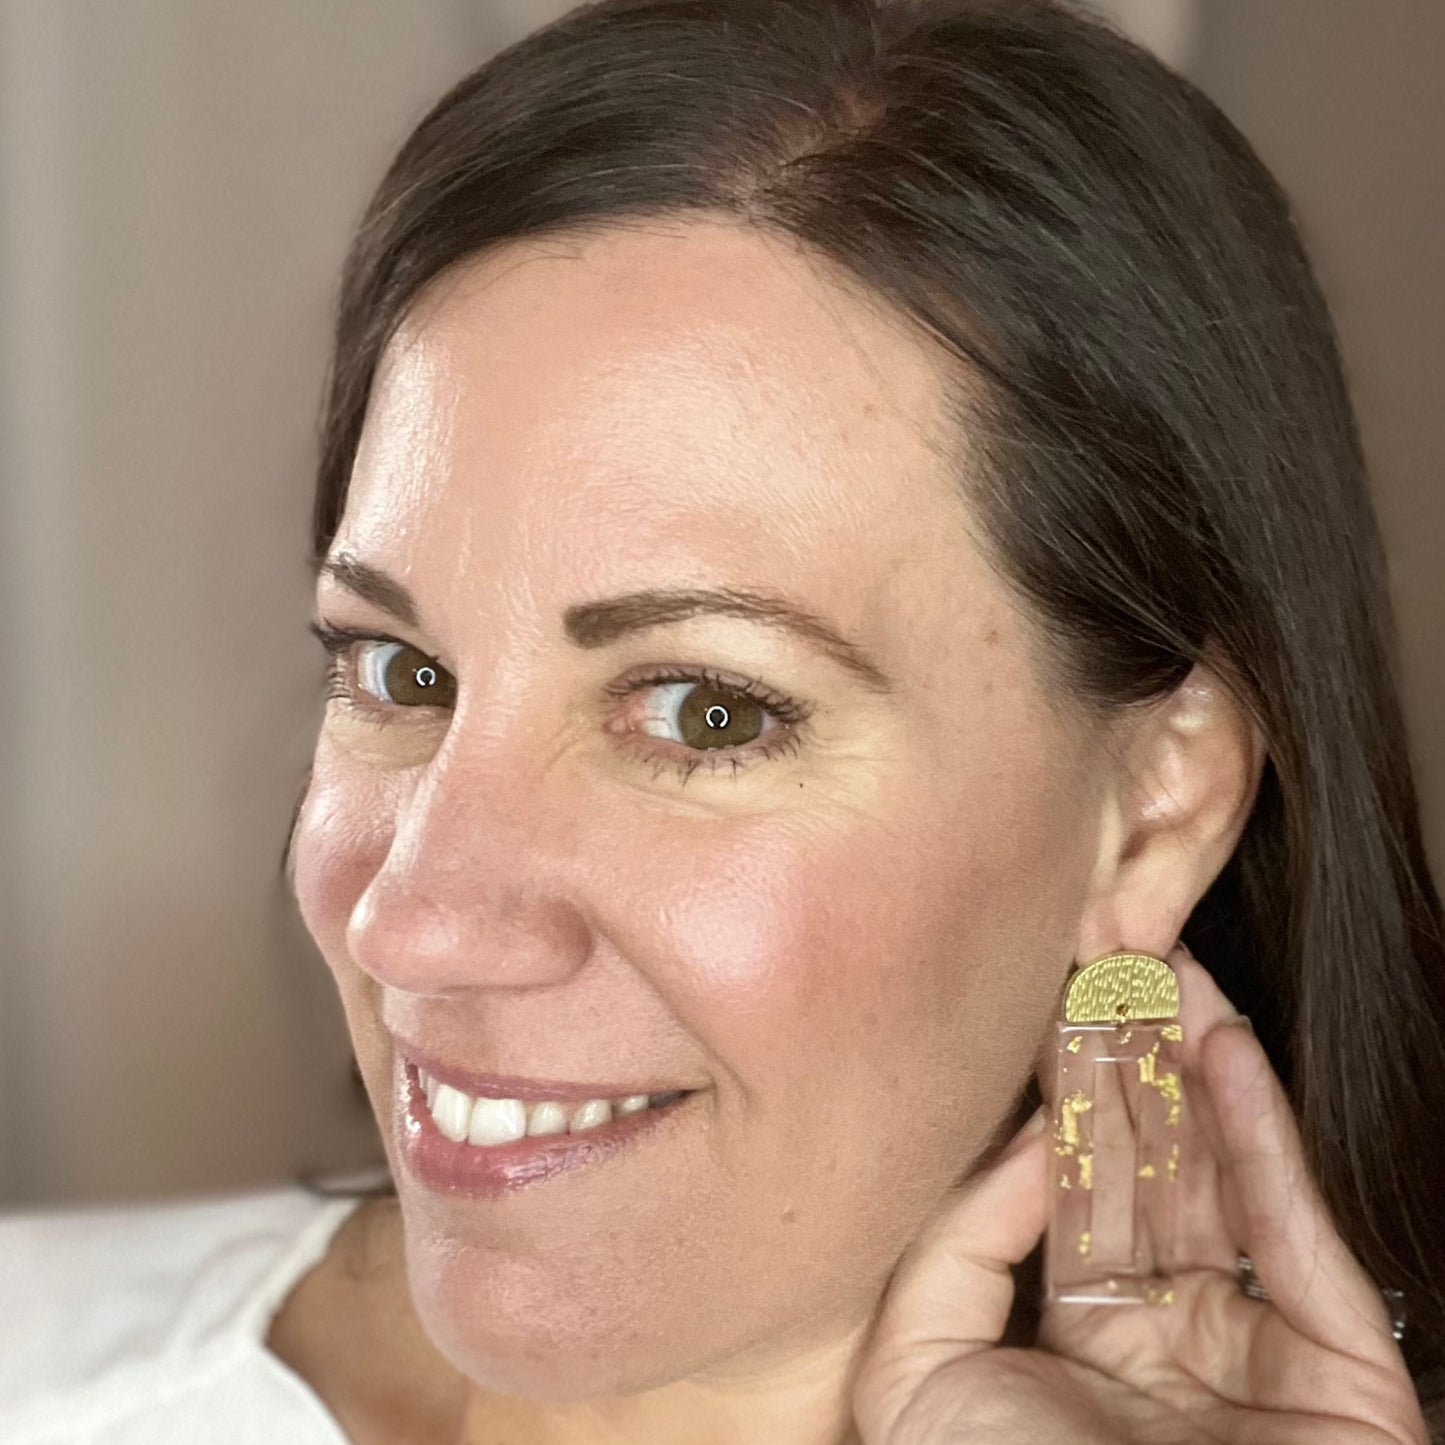 Gold Flake Ansley Earrings by Millie B.